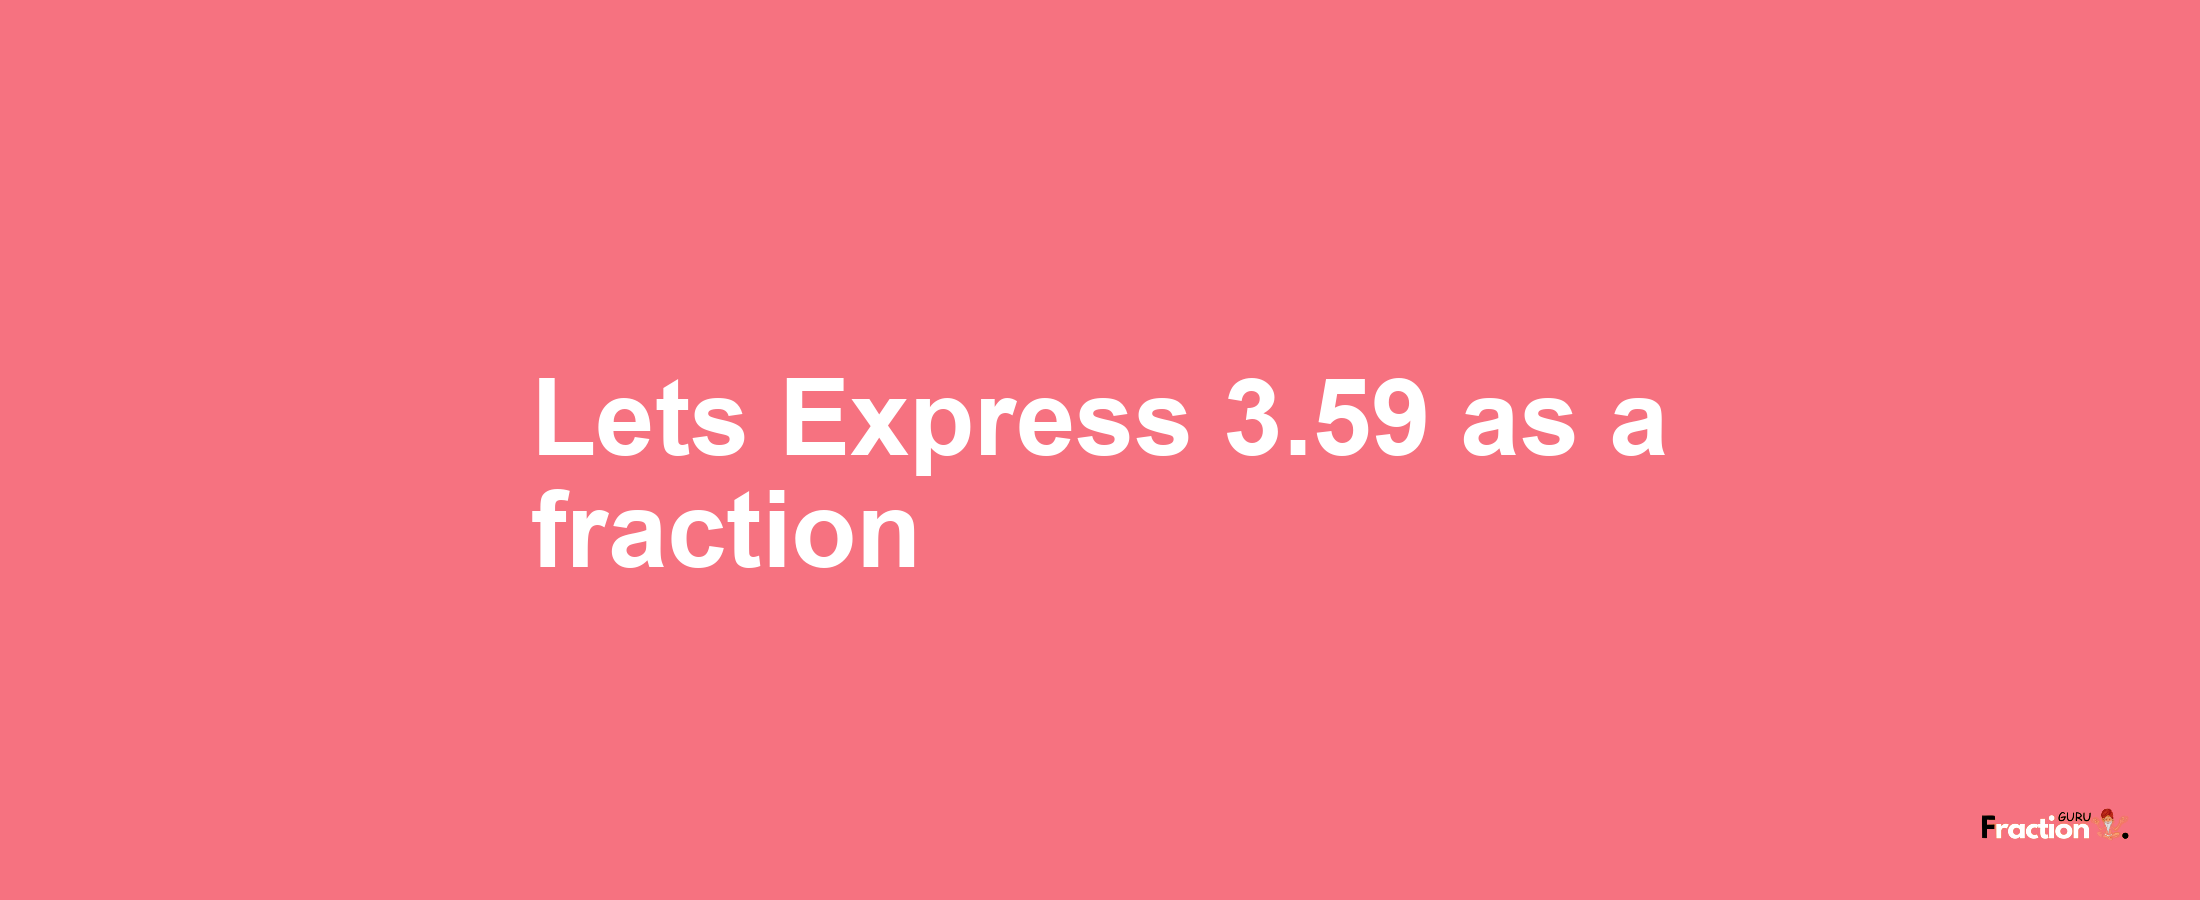 Lets Express 3.59 as afraction